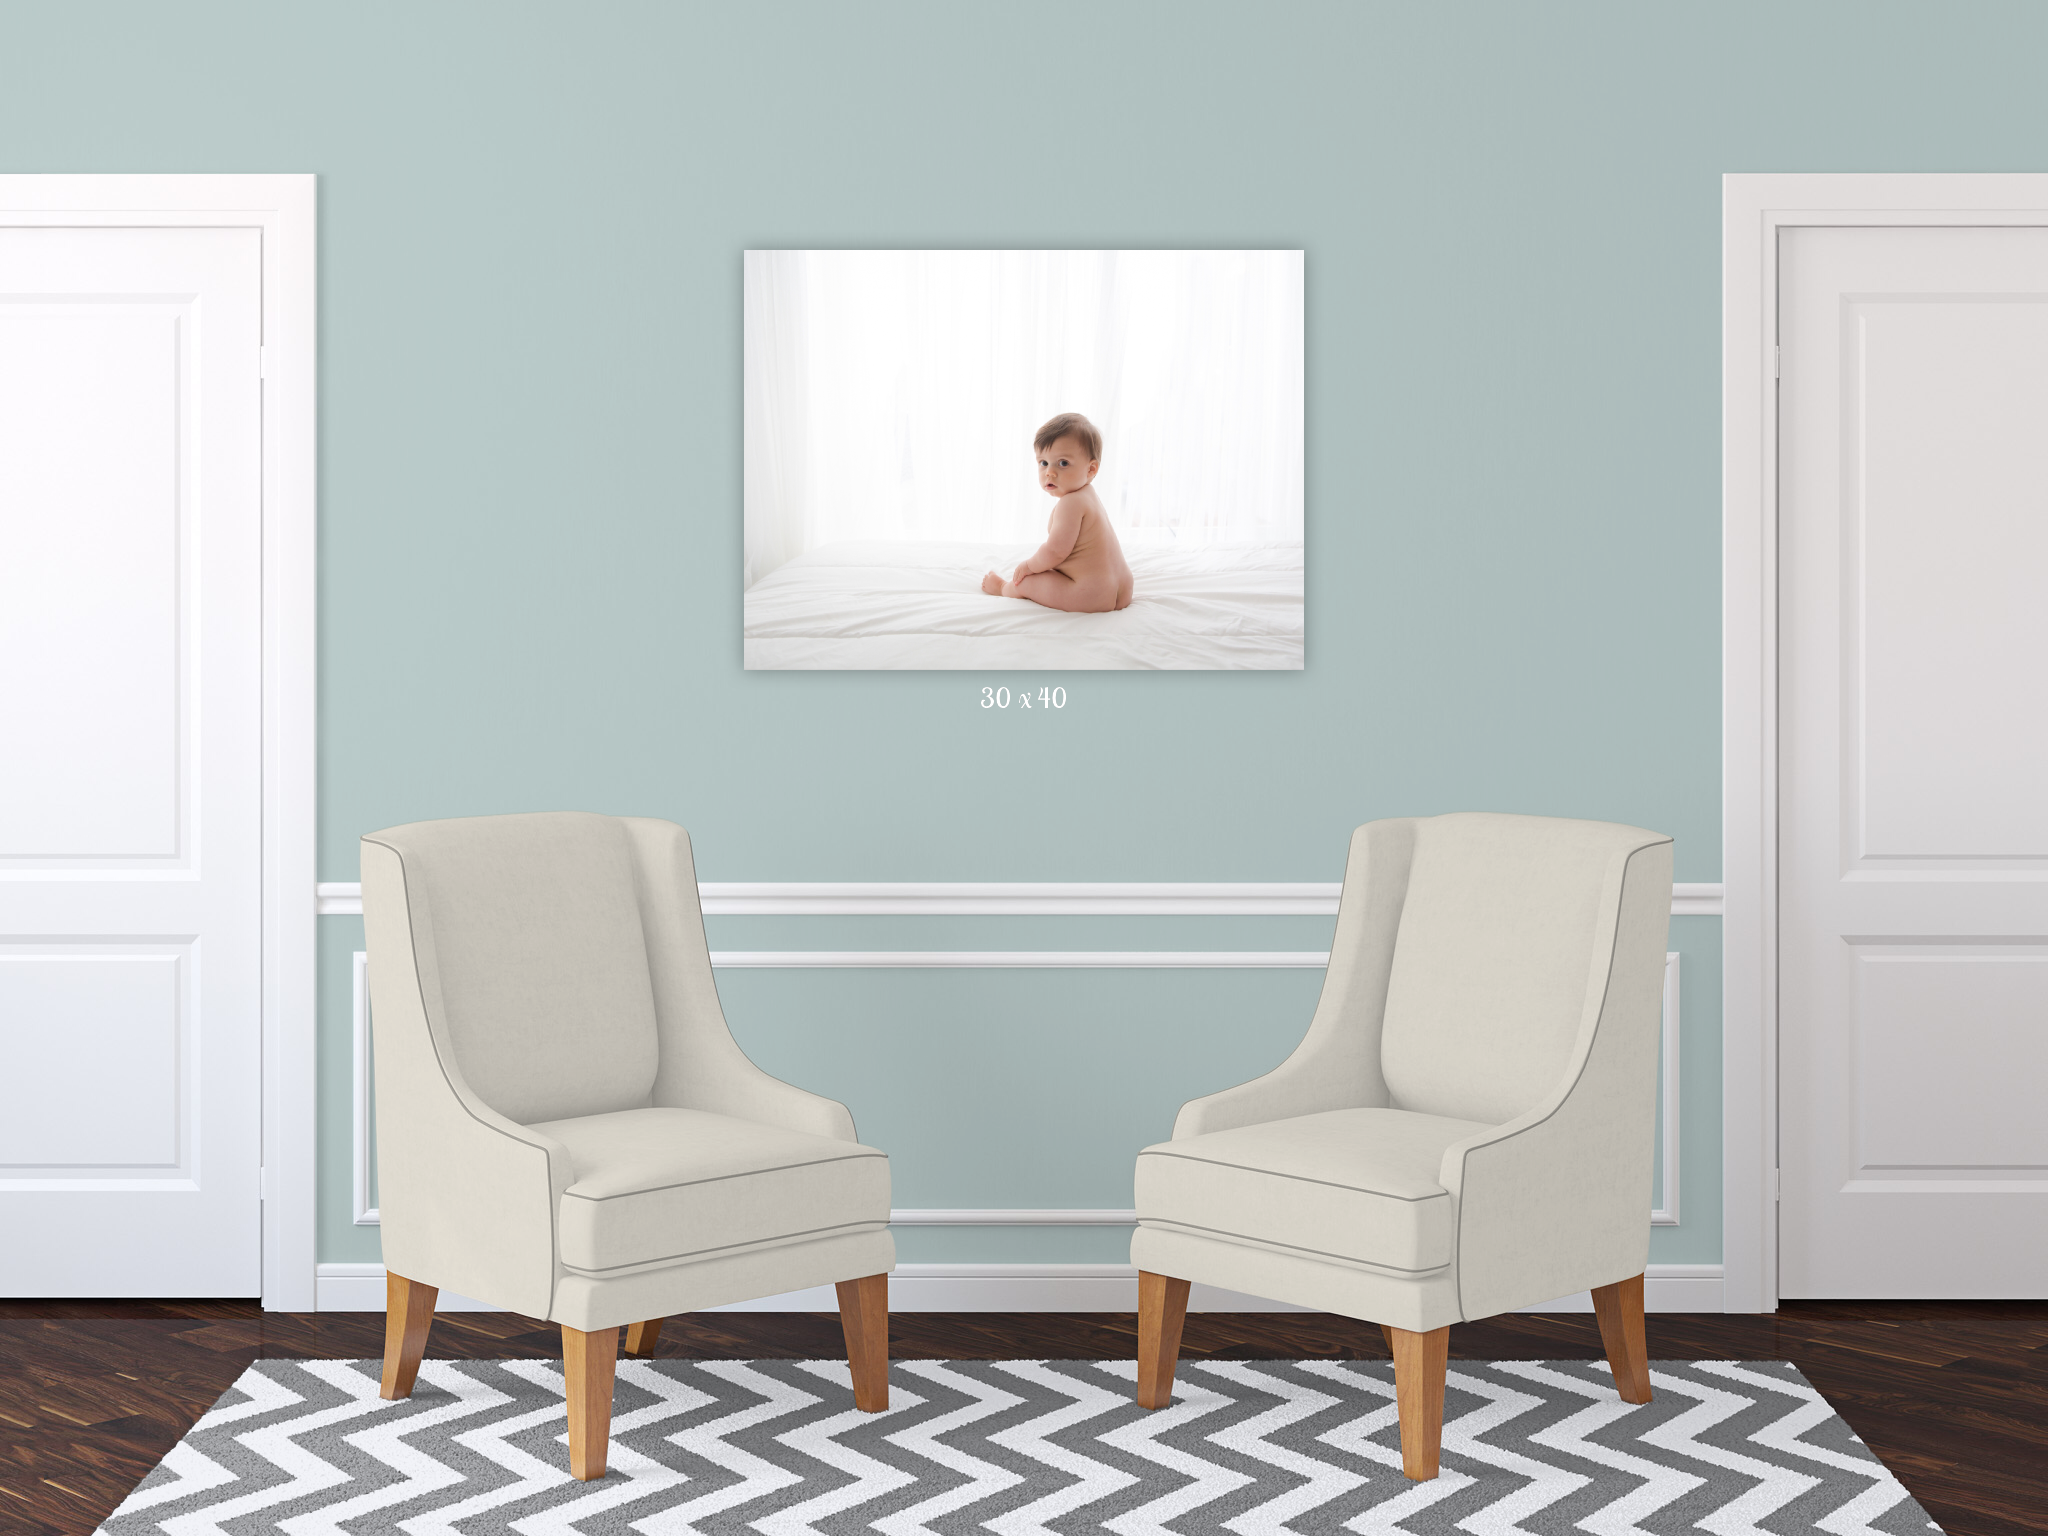 hallway wall gallery by stinsman photography new jersey photographer